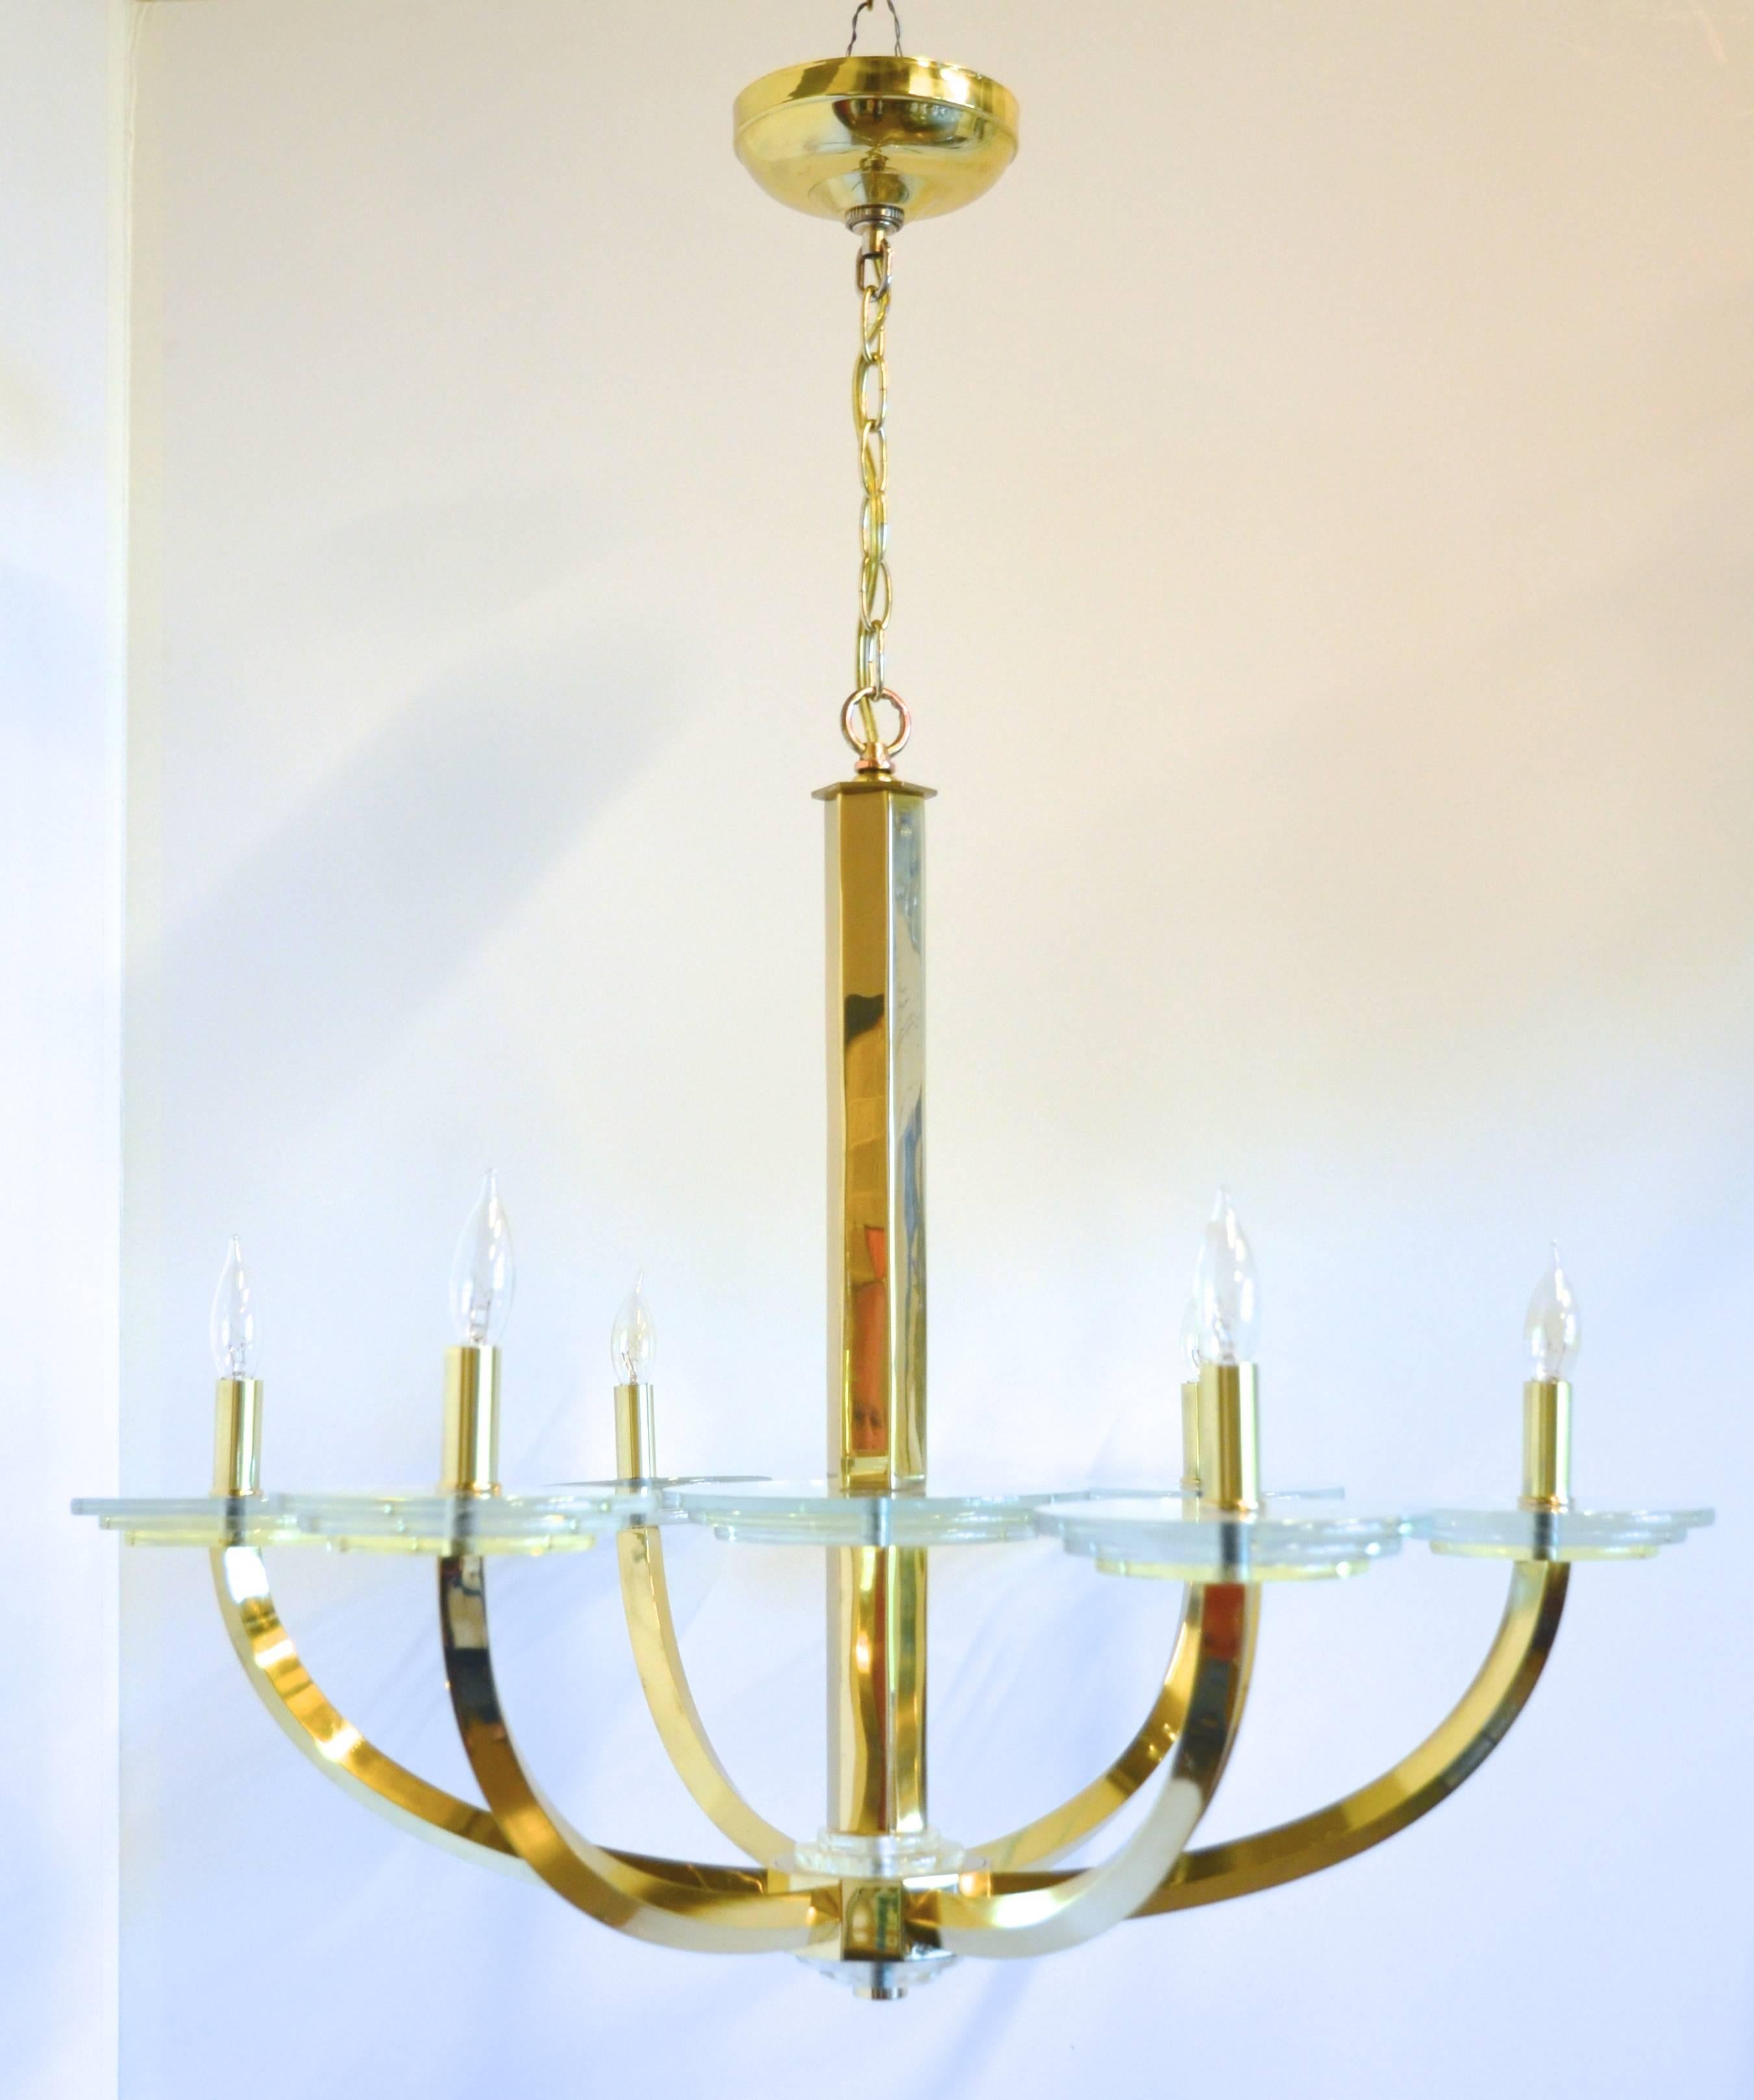 Handsome mid-century six-armed brass chandelier with acrylic or Lucite discs. Rewired, polished and in near perfect condition. Canopy is 5.5" in diameter with the canopy and chain the fixture measures 35" from top to bottom.  In the style